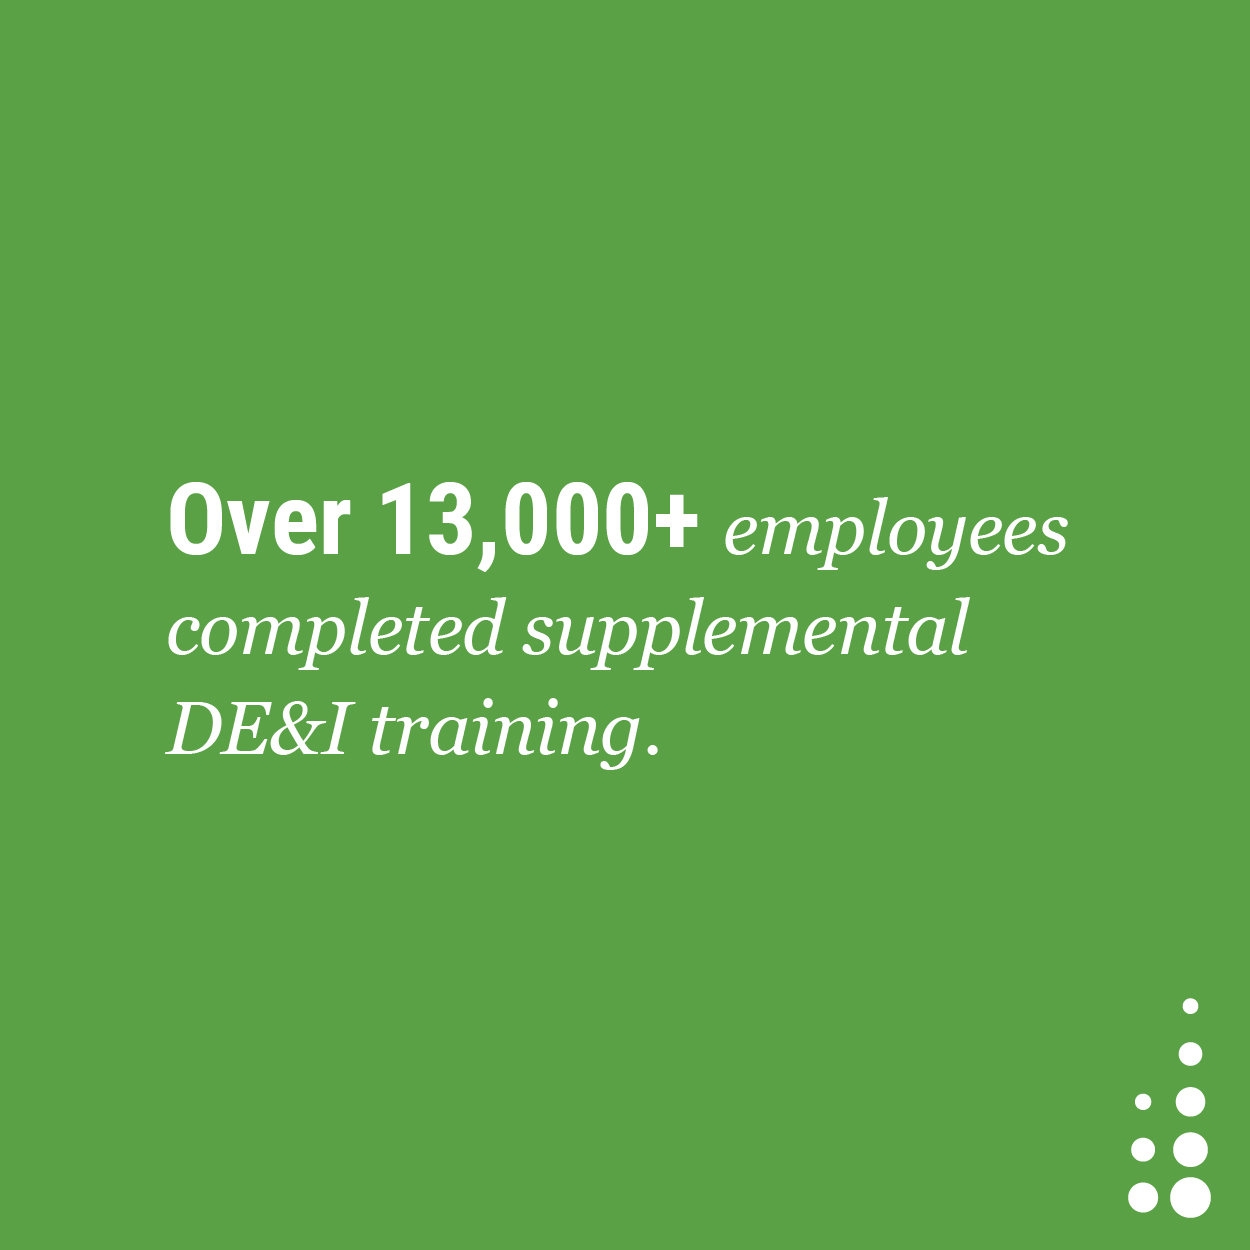 Over 13,000+ employees completed supplemental DE&I training.